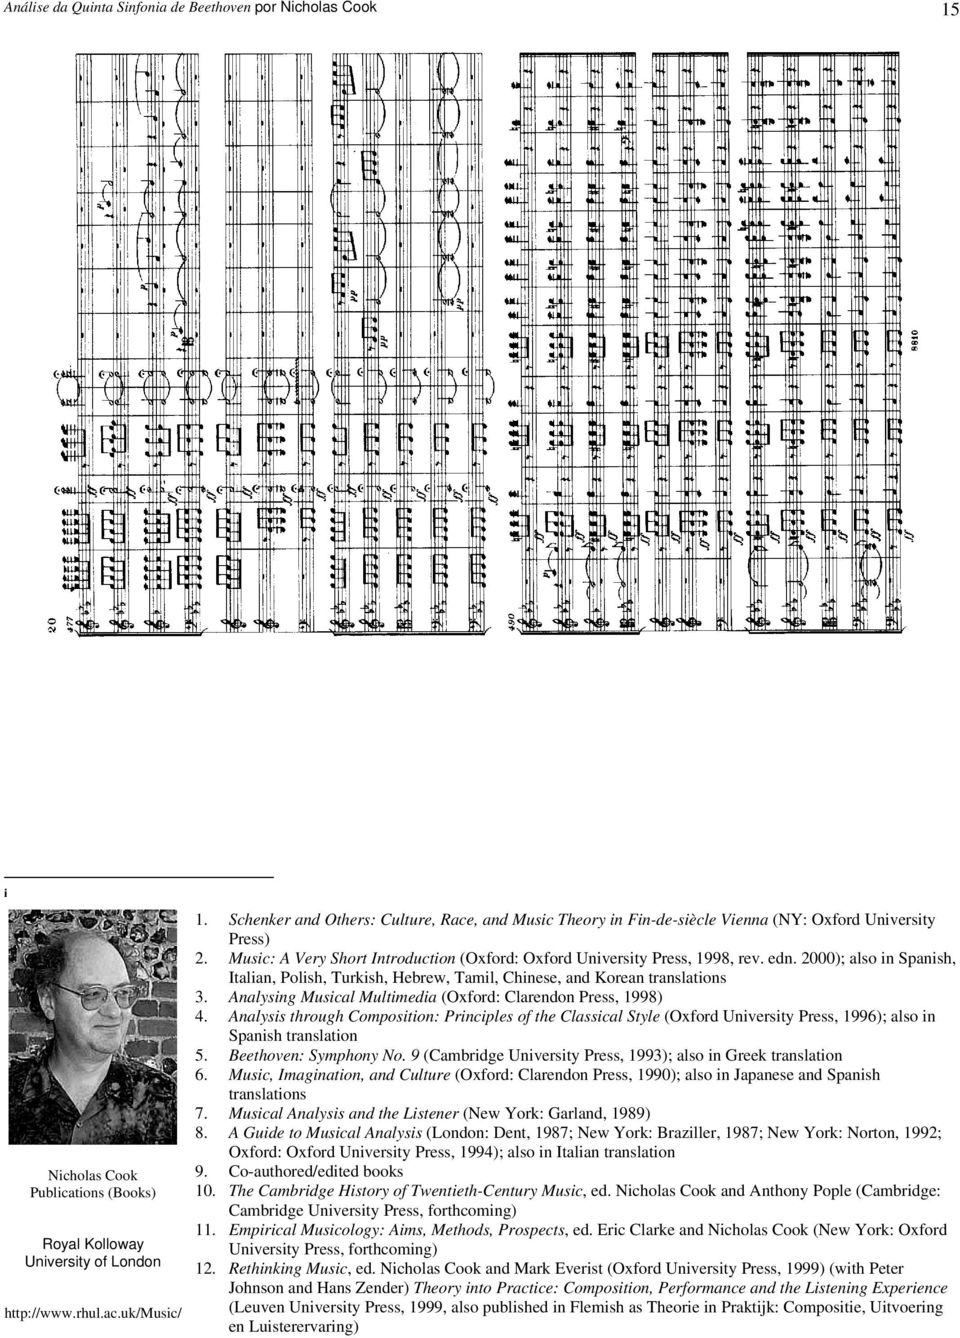 2000); also in Spanish, Italian, Polish, Turkish, Hebrew, Tamil, Chinese, and Korean translations 3. Analysing Musical Multimedia (Oxford: Clarendon Press, 1998) 4.